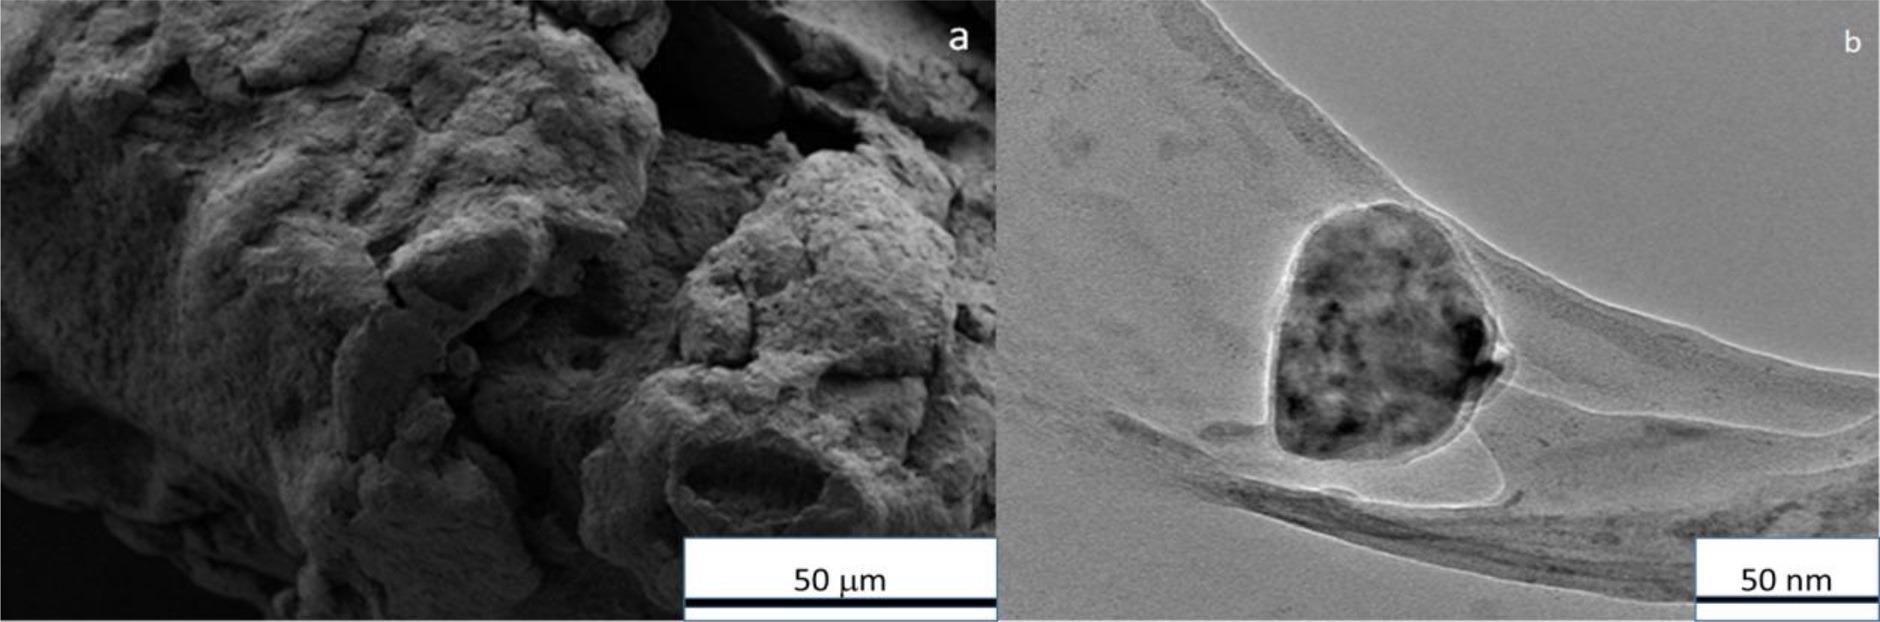 (a) Field Emission-SEM images of the Fe-Cu powder (b) TEM of FeCu material showing a small cluster of FeCu [25].